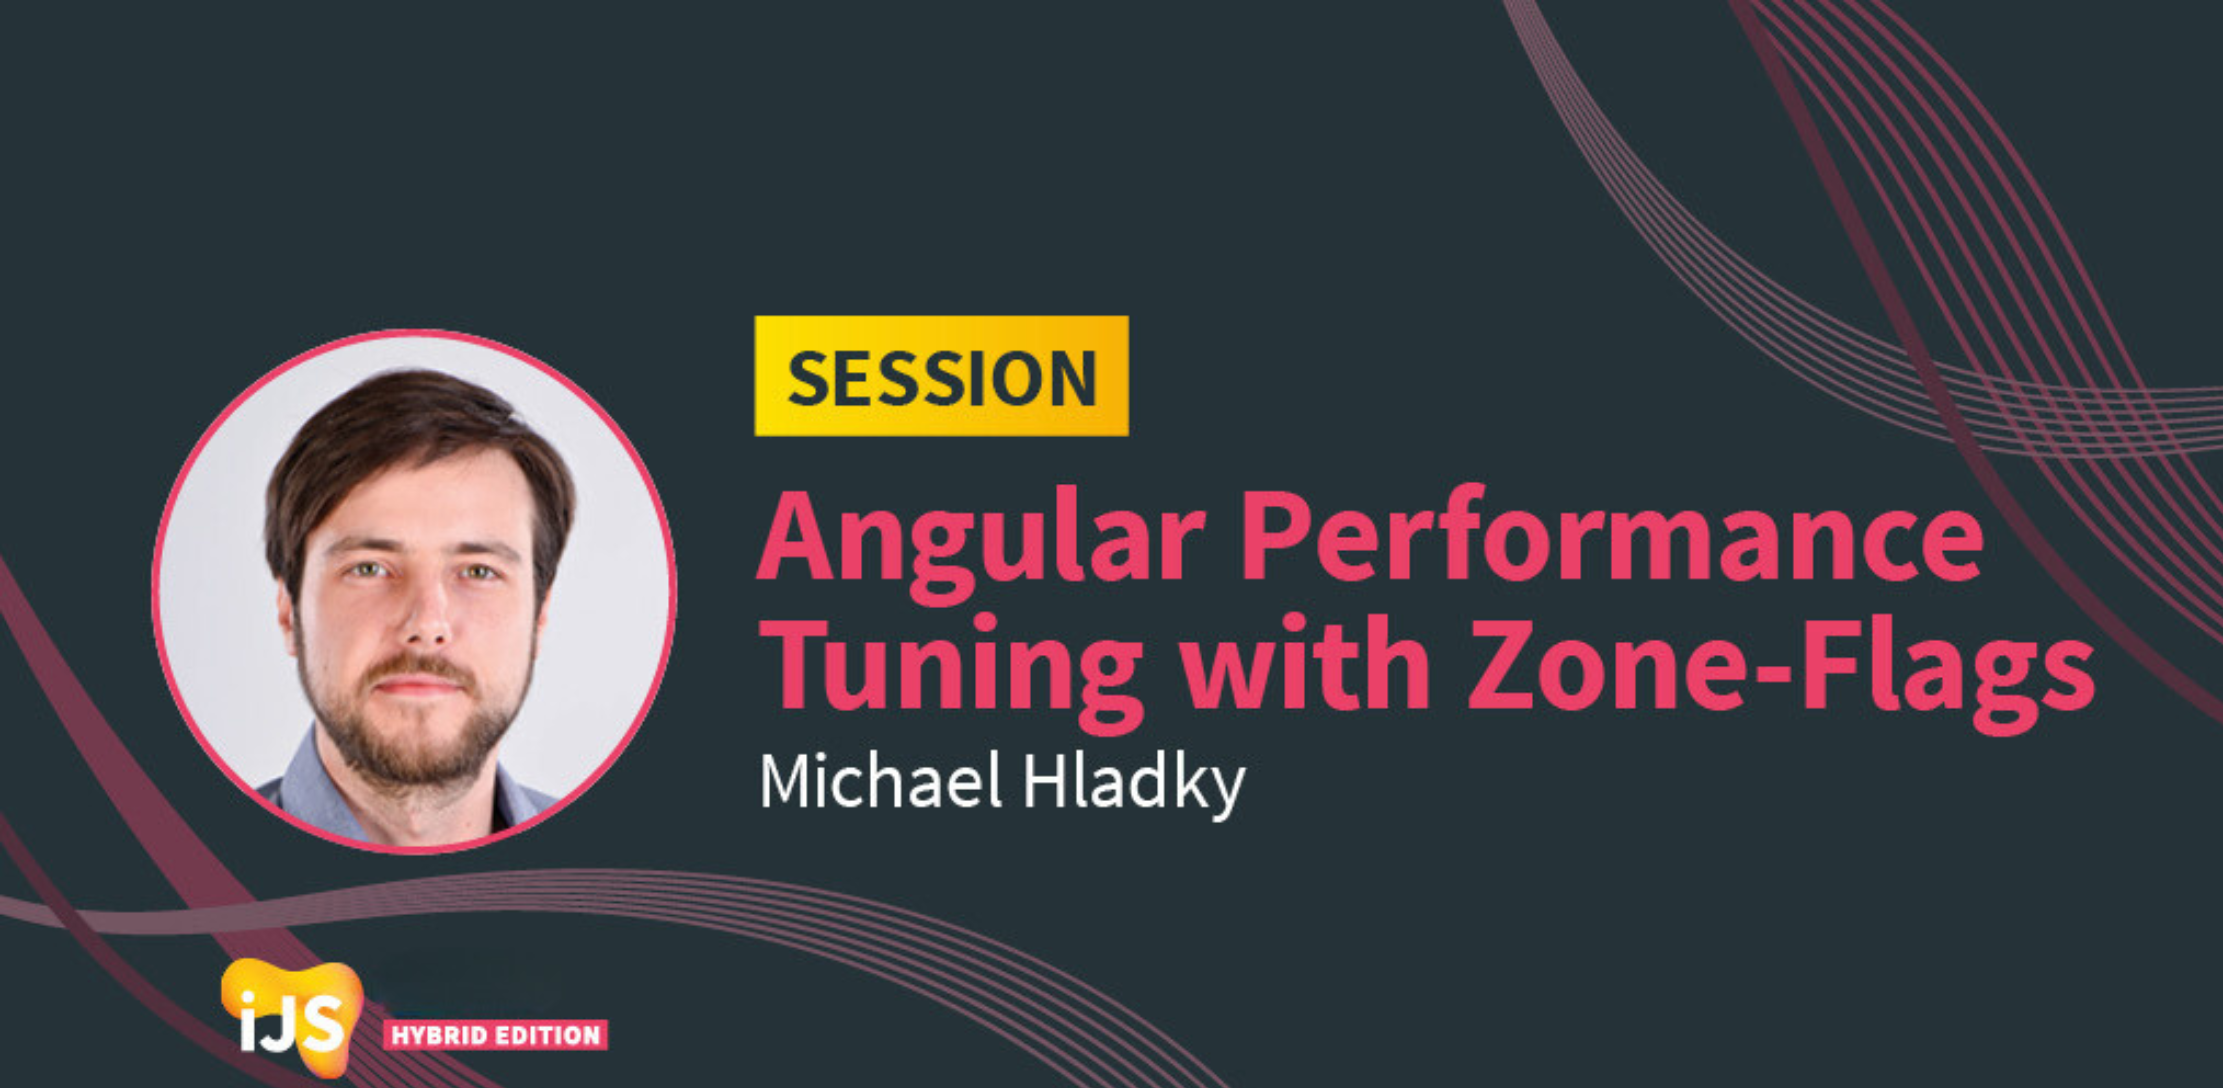 Angular performance tuning with Zone-Flags. Poster.